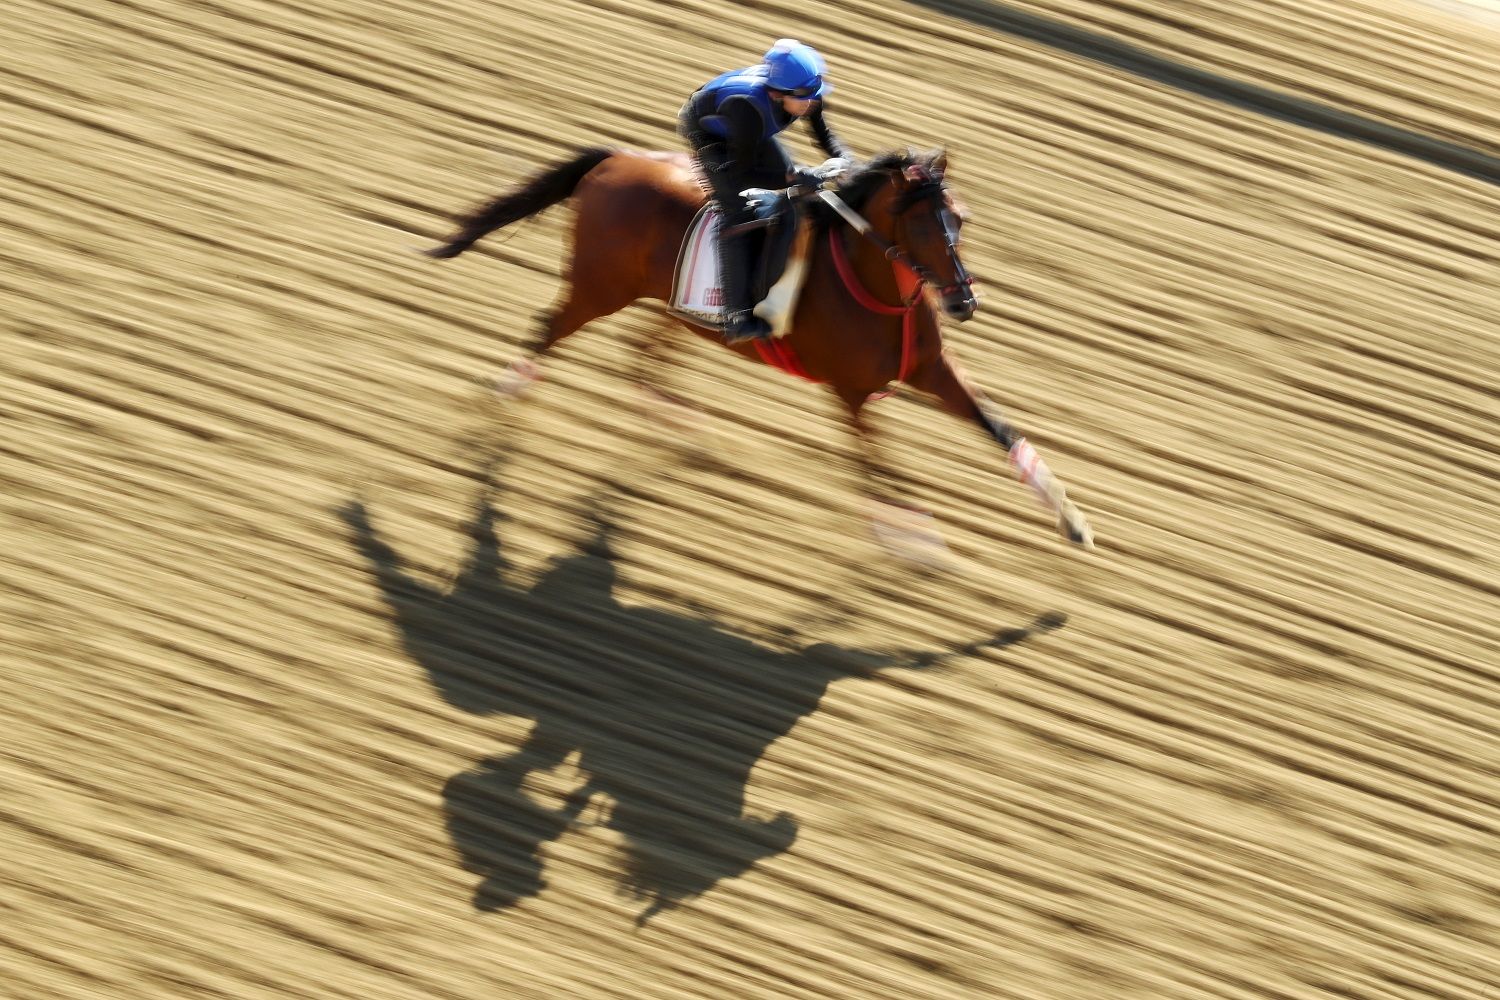 BALTIMORE, MARYLAND - MAY 15:  Bodexpress trains on the track during a training session for the upcoming Preakness Stakes at Pimlico Race Course on May 15, 2019 in Baltimore, Maryland. (Photo by Rob Carr/Getty Images)